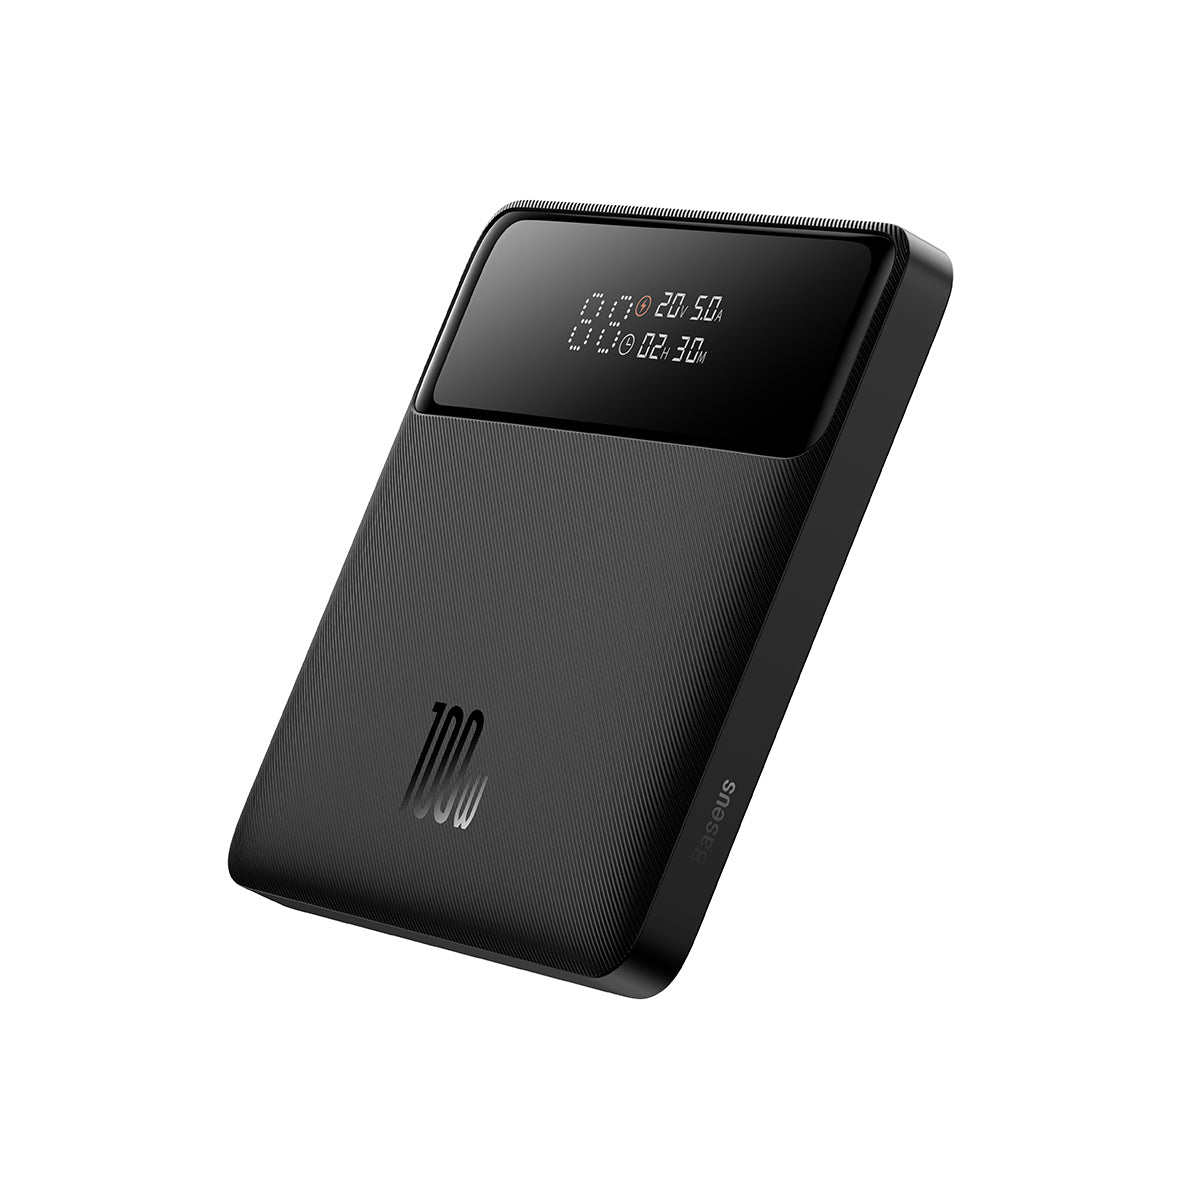 Baseus Blade 100W Power Bank upgraded model with reduced footprint launches  -  News